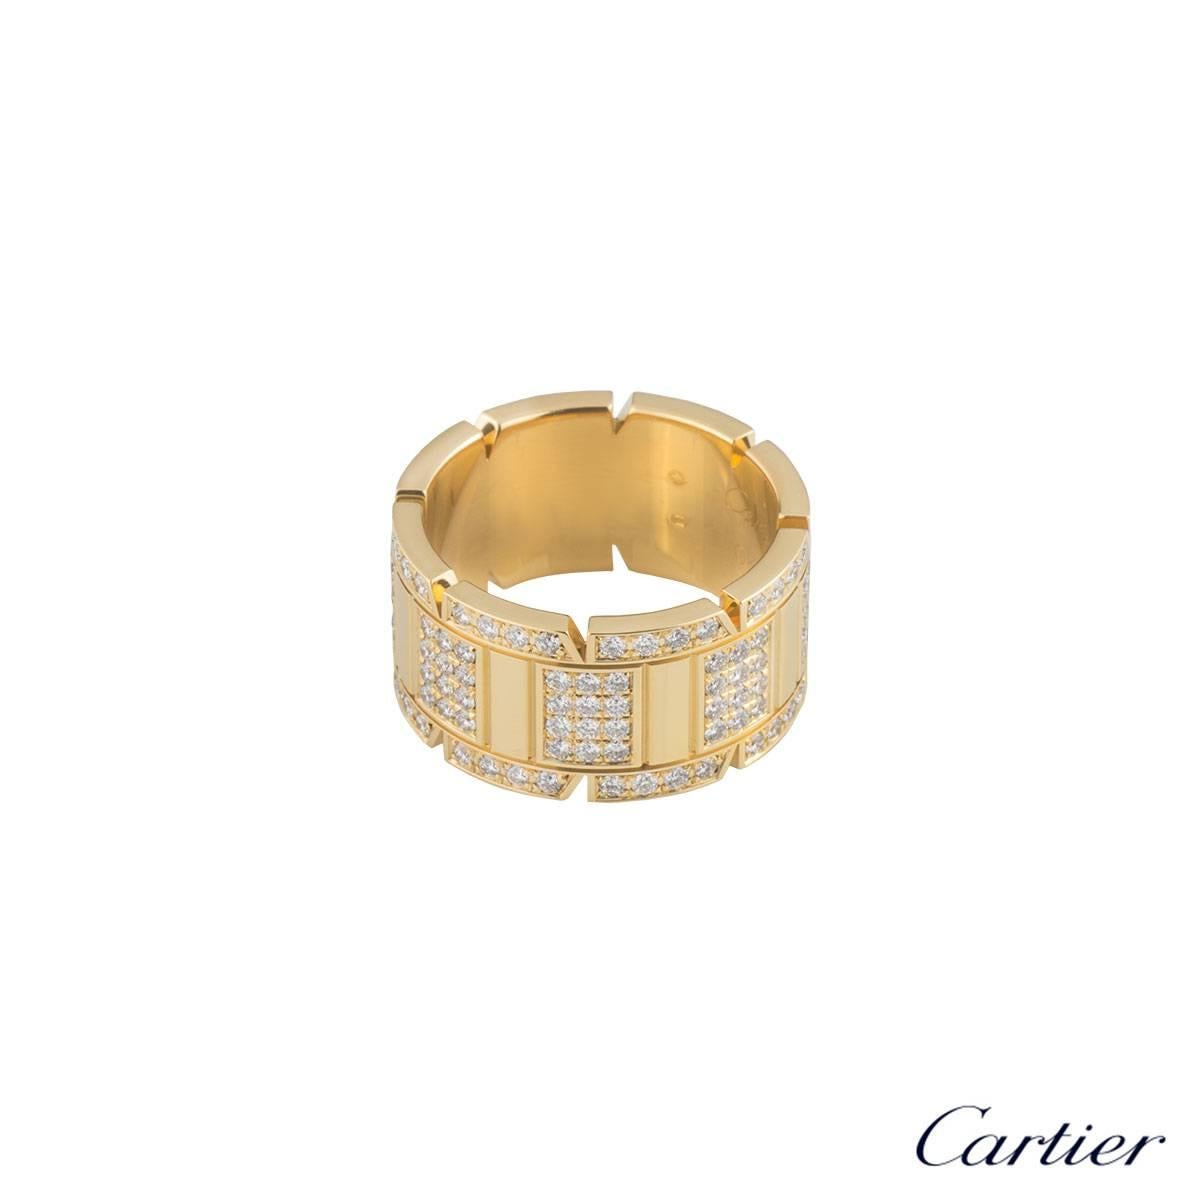 A beautiful 18k yellow gold plain Cartier Tank Francaise ring from the Links and Chain collection. The ring is composed of the iconic triple row of brick work motifs throughout with 160 round brilliant cut diamonds in a pave setting. The diamonds